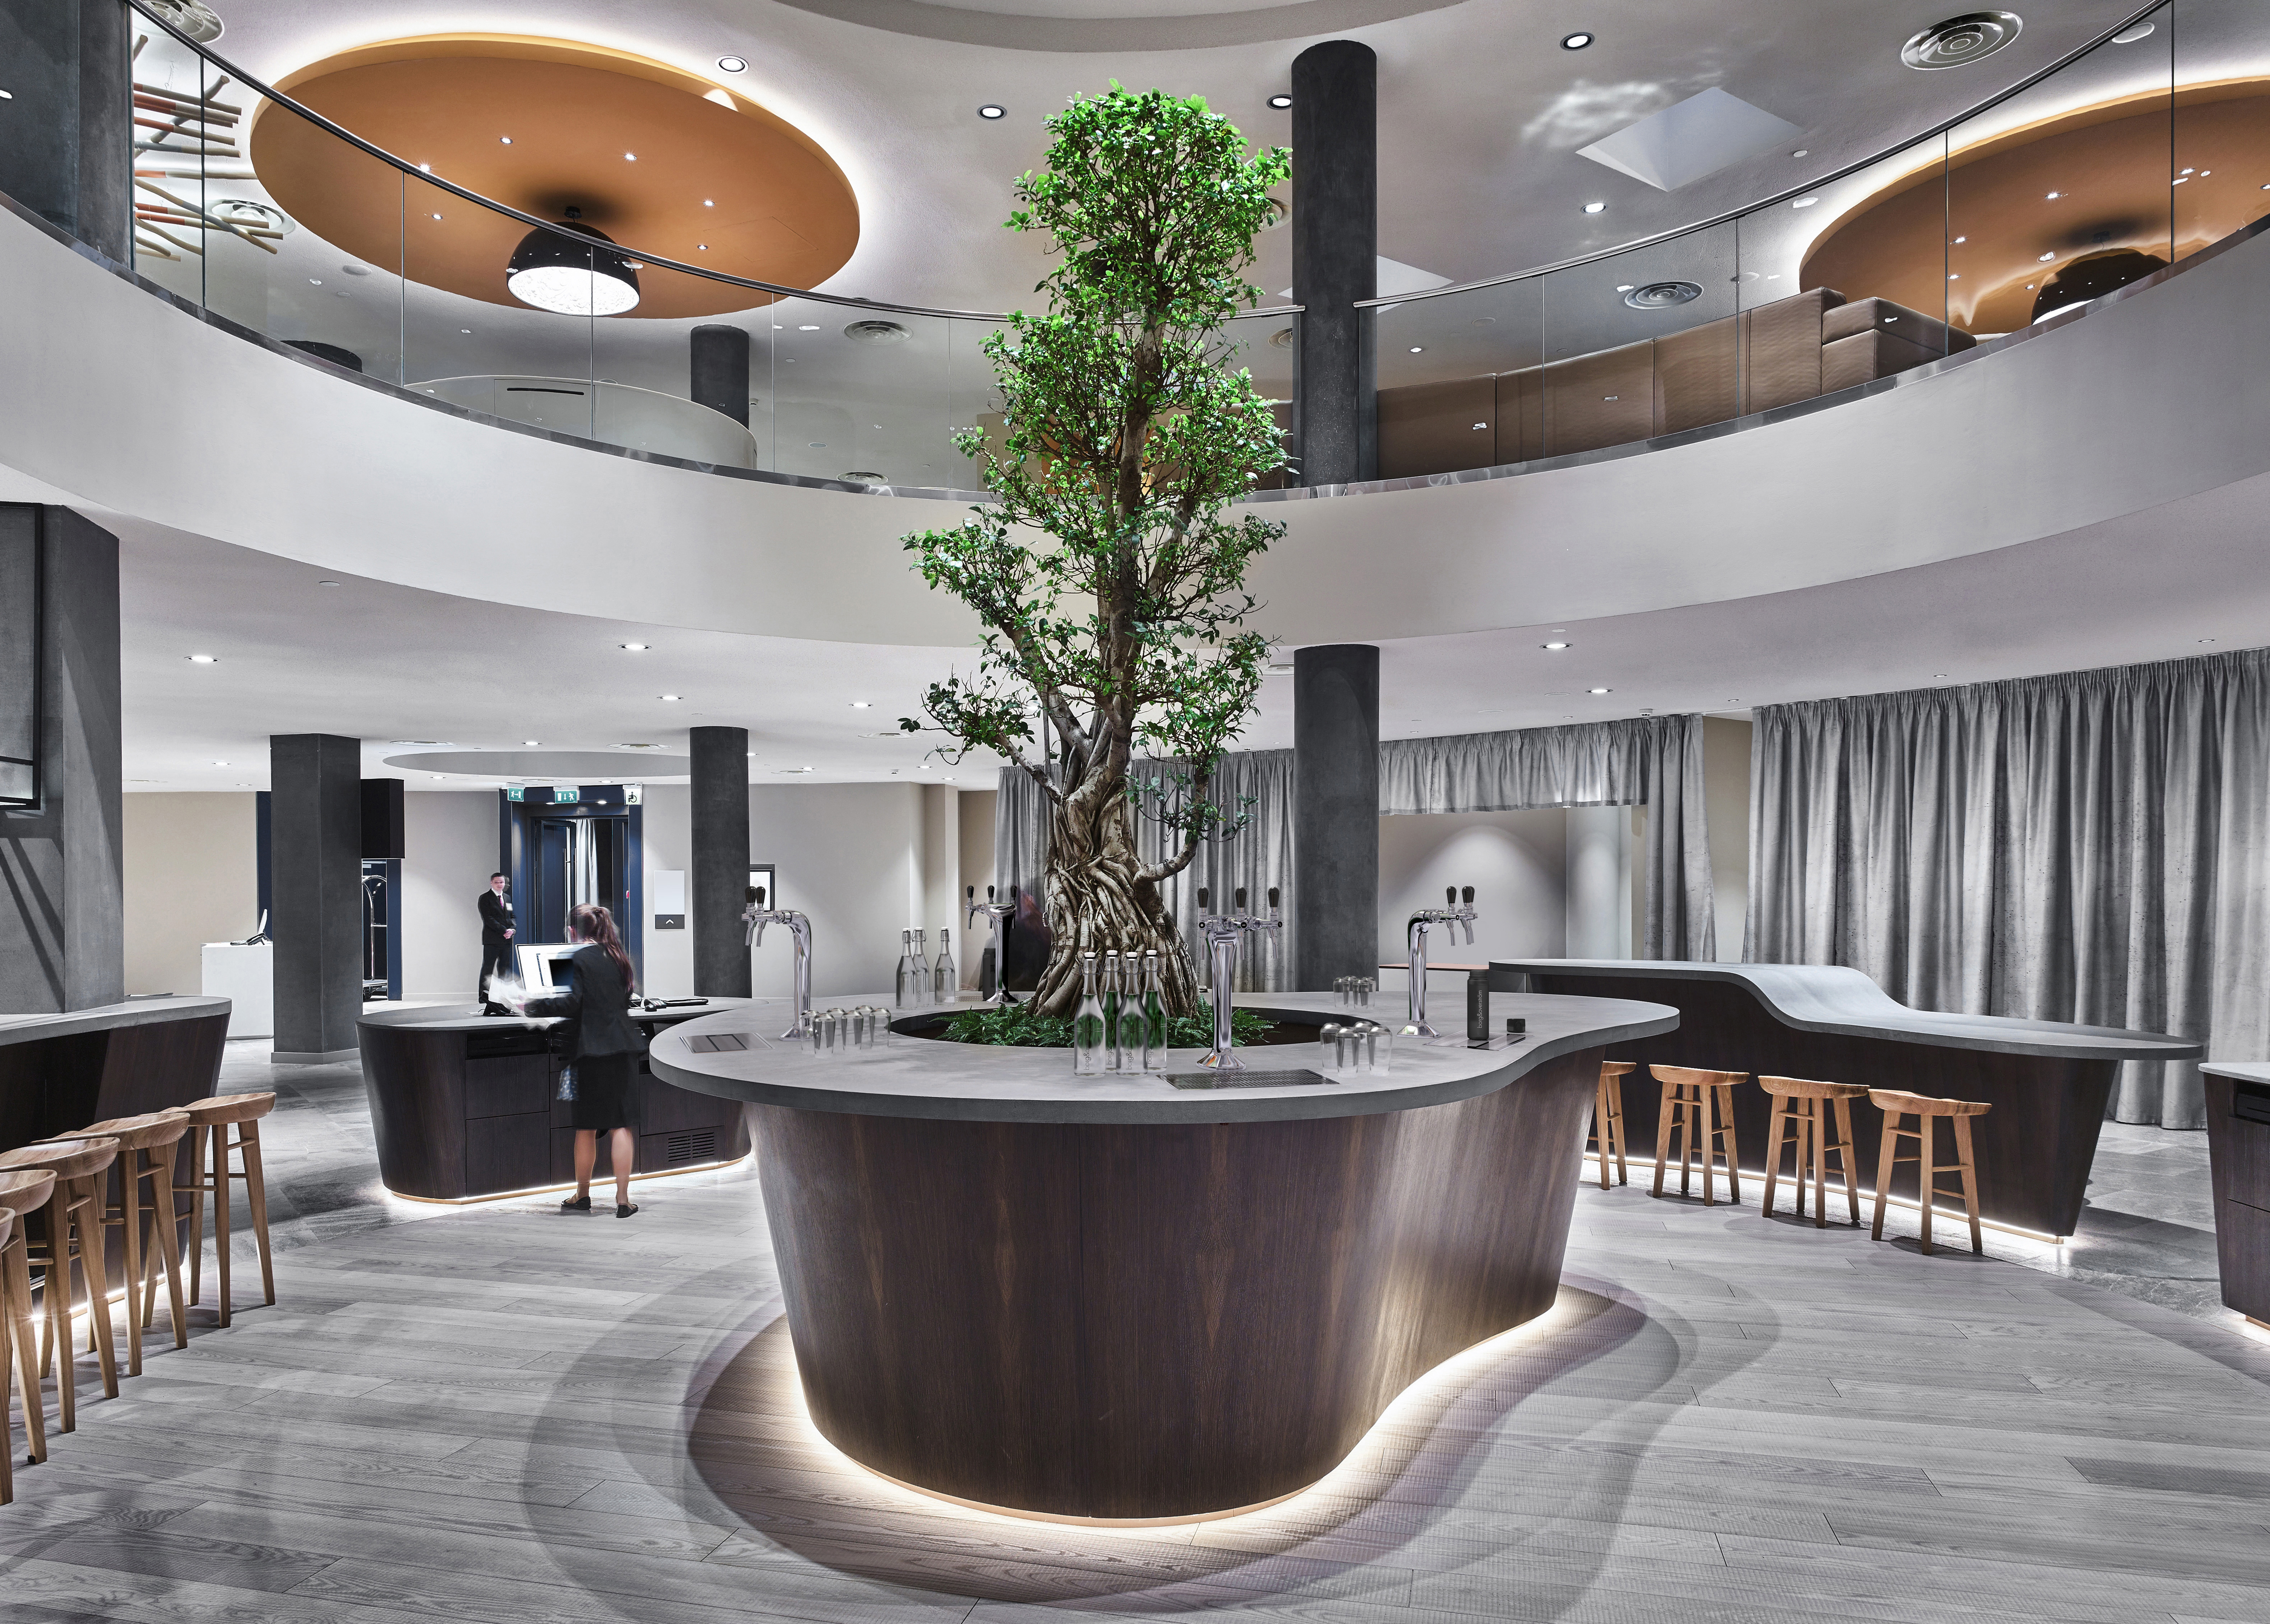 Reception and lobby in Kievskiy hotel complex in Moscow